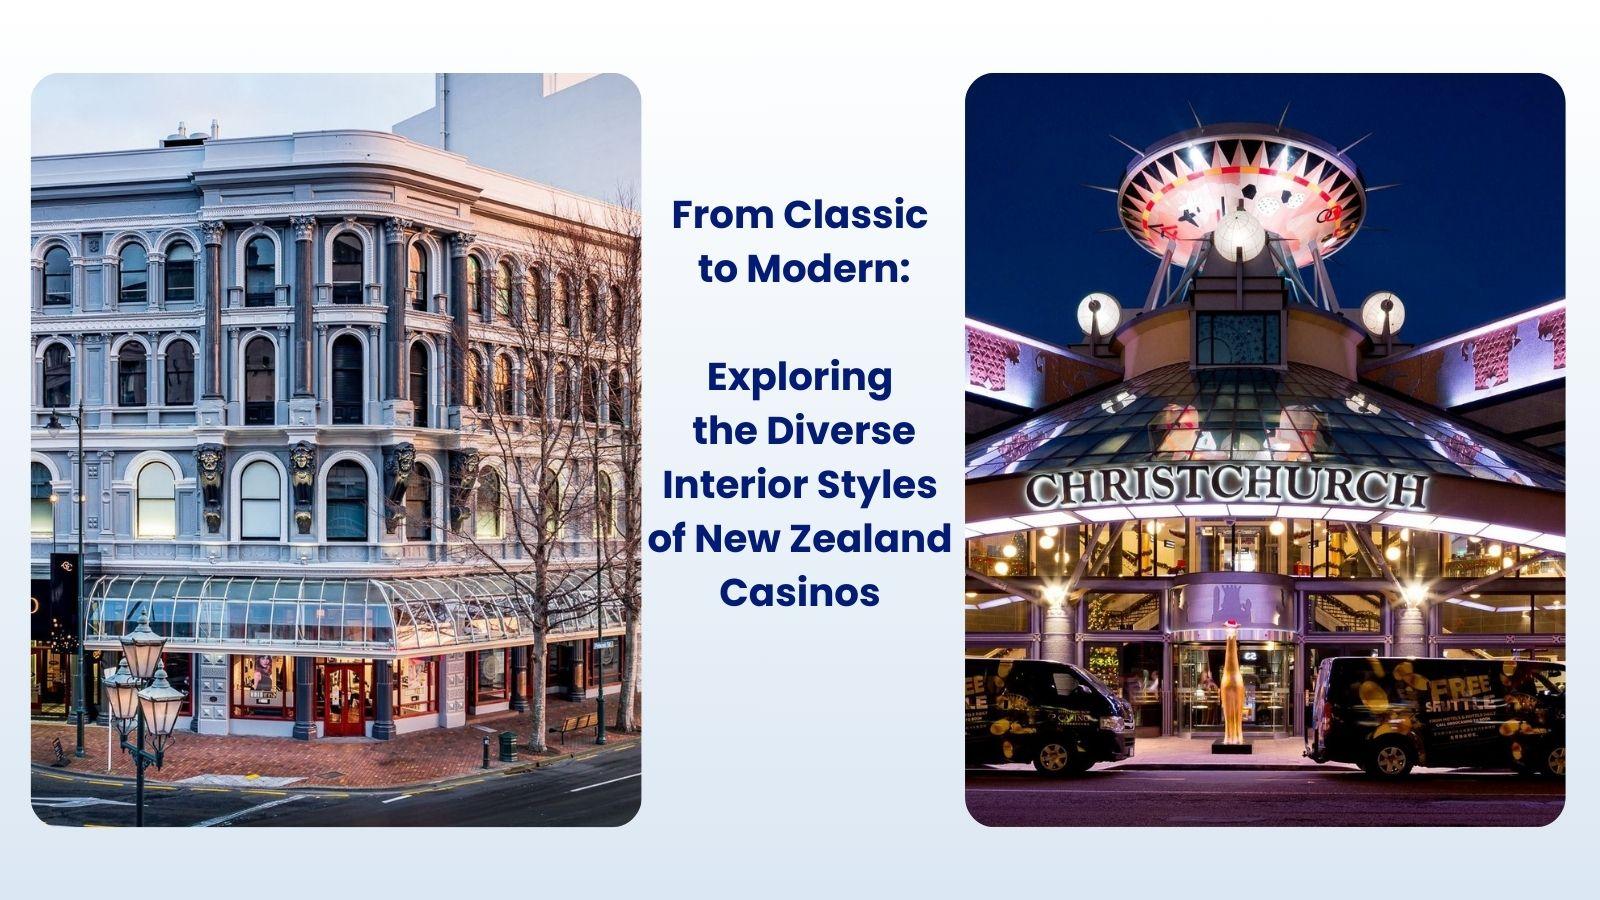 From Classic to Modern: Exploring the Diverse Interior Styles of New Zealand Casinos